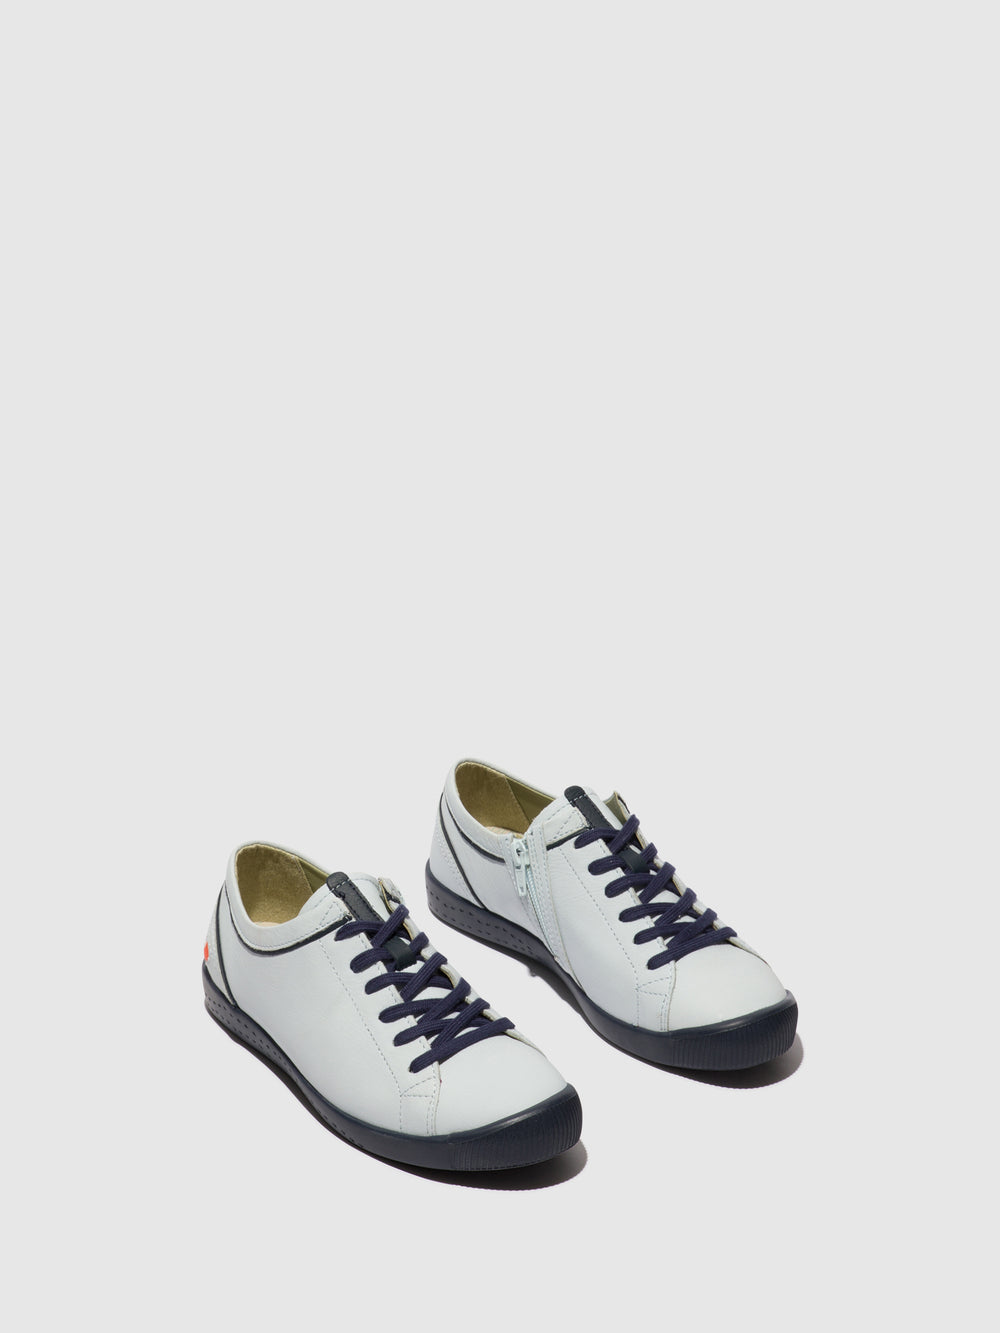 Lace-up Trainers IBBA691SOF LIGHT BLUE/NAVY